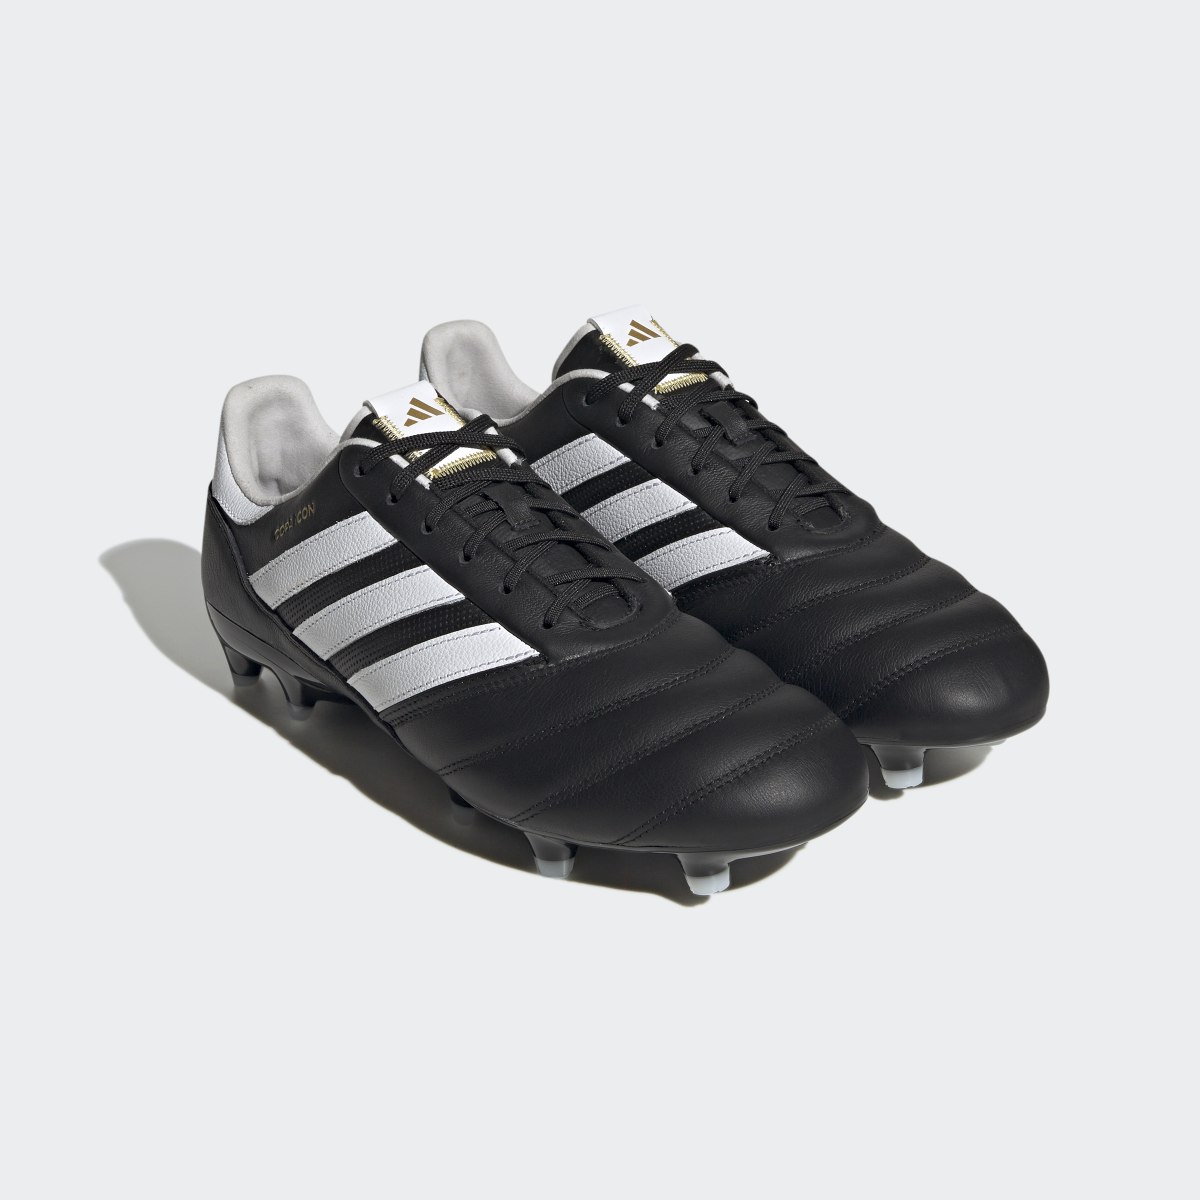 Adidas Copa Icon Firm Ground Soccer Cleats. 8